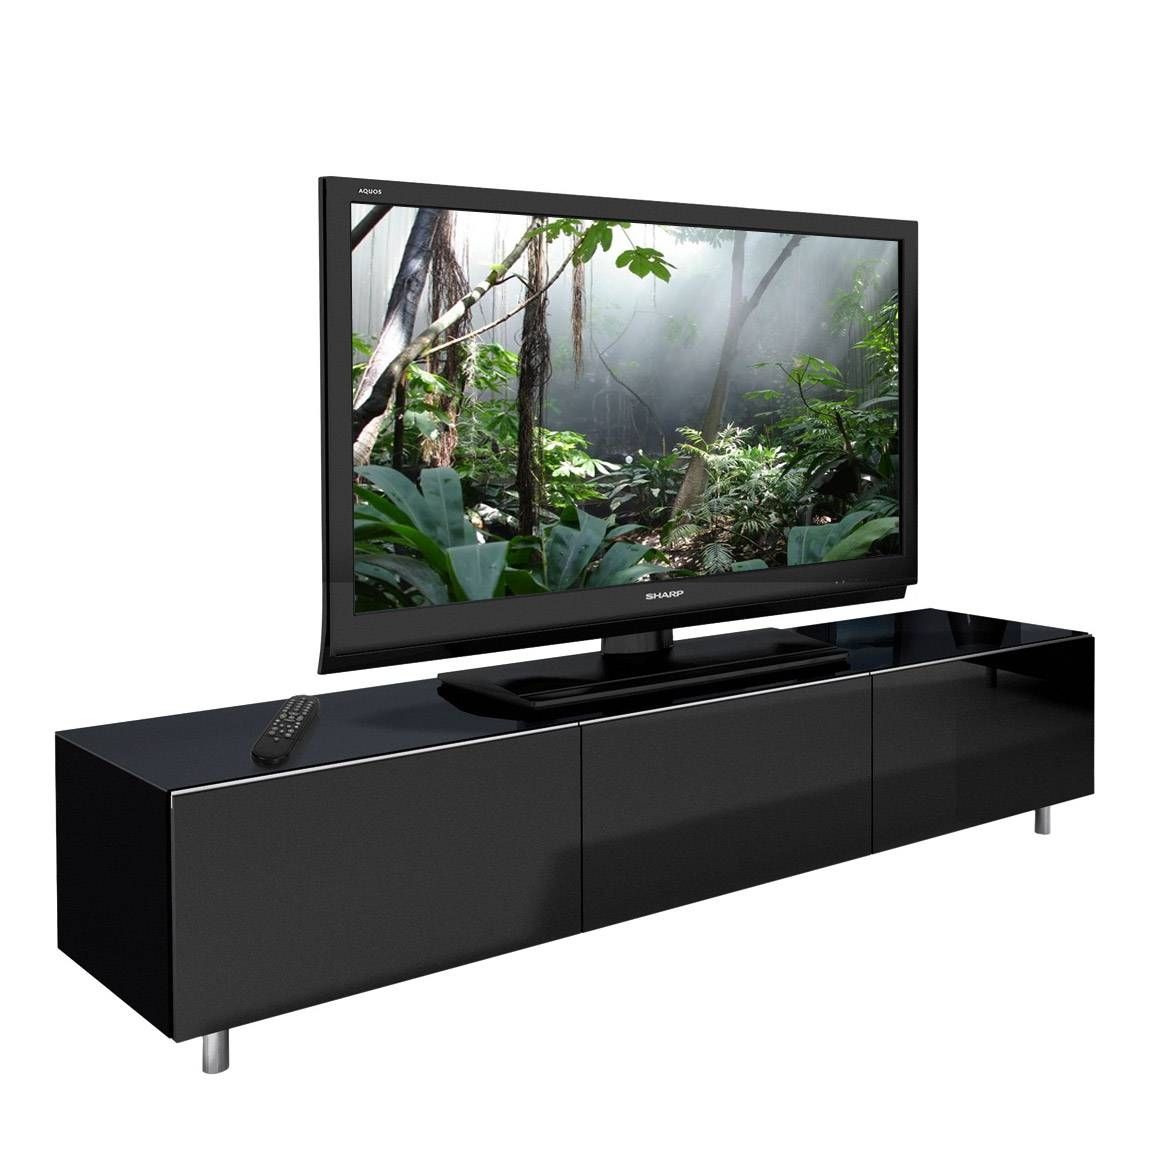 Spectral Just Racks Jrl1650s Gloss Black Tv Cabinet – Just Racks Within Shiny Black Tv Stands (View 2 of 15)